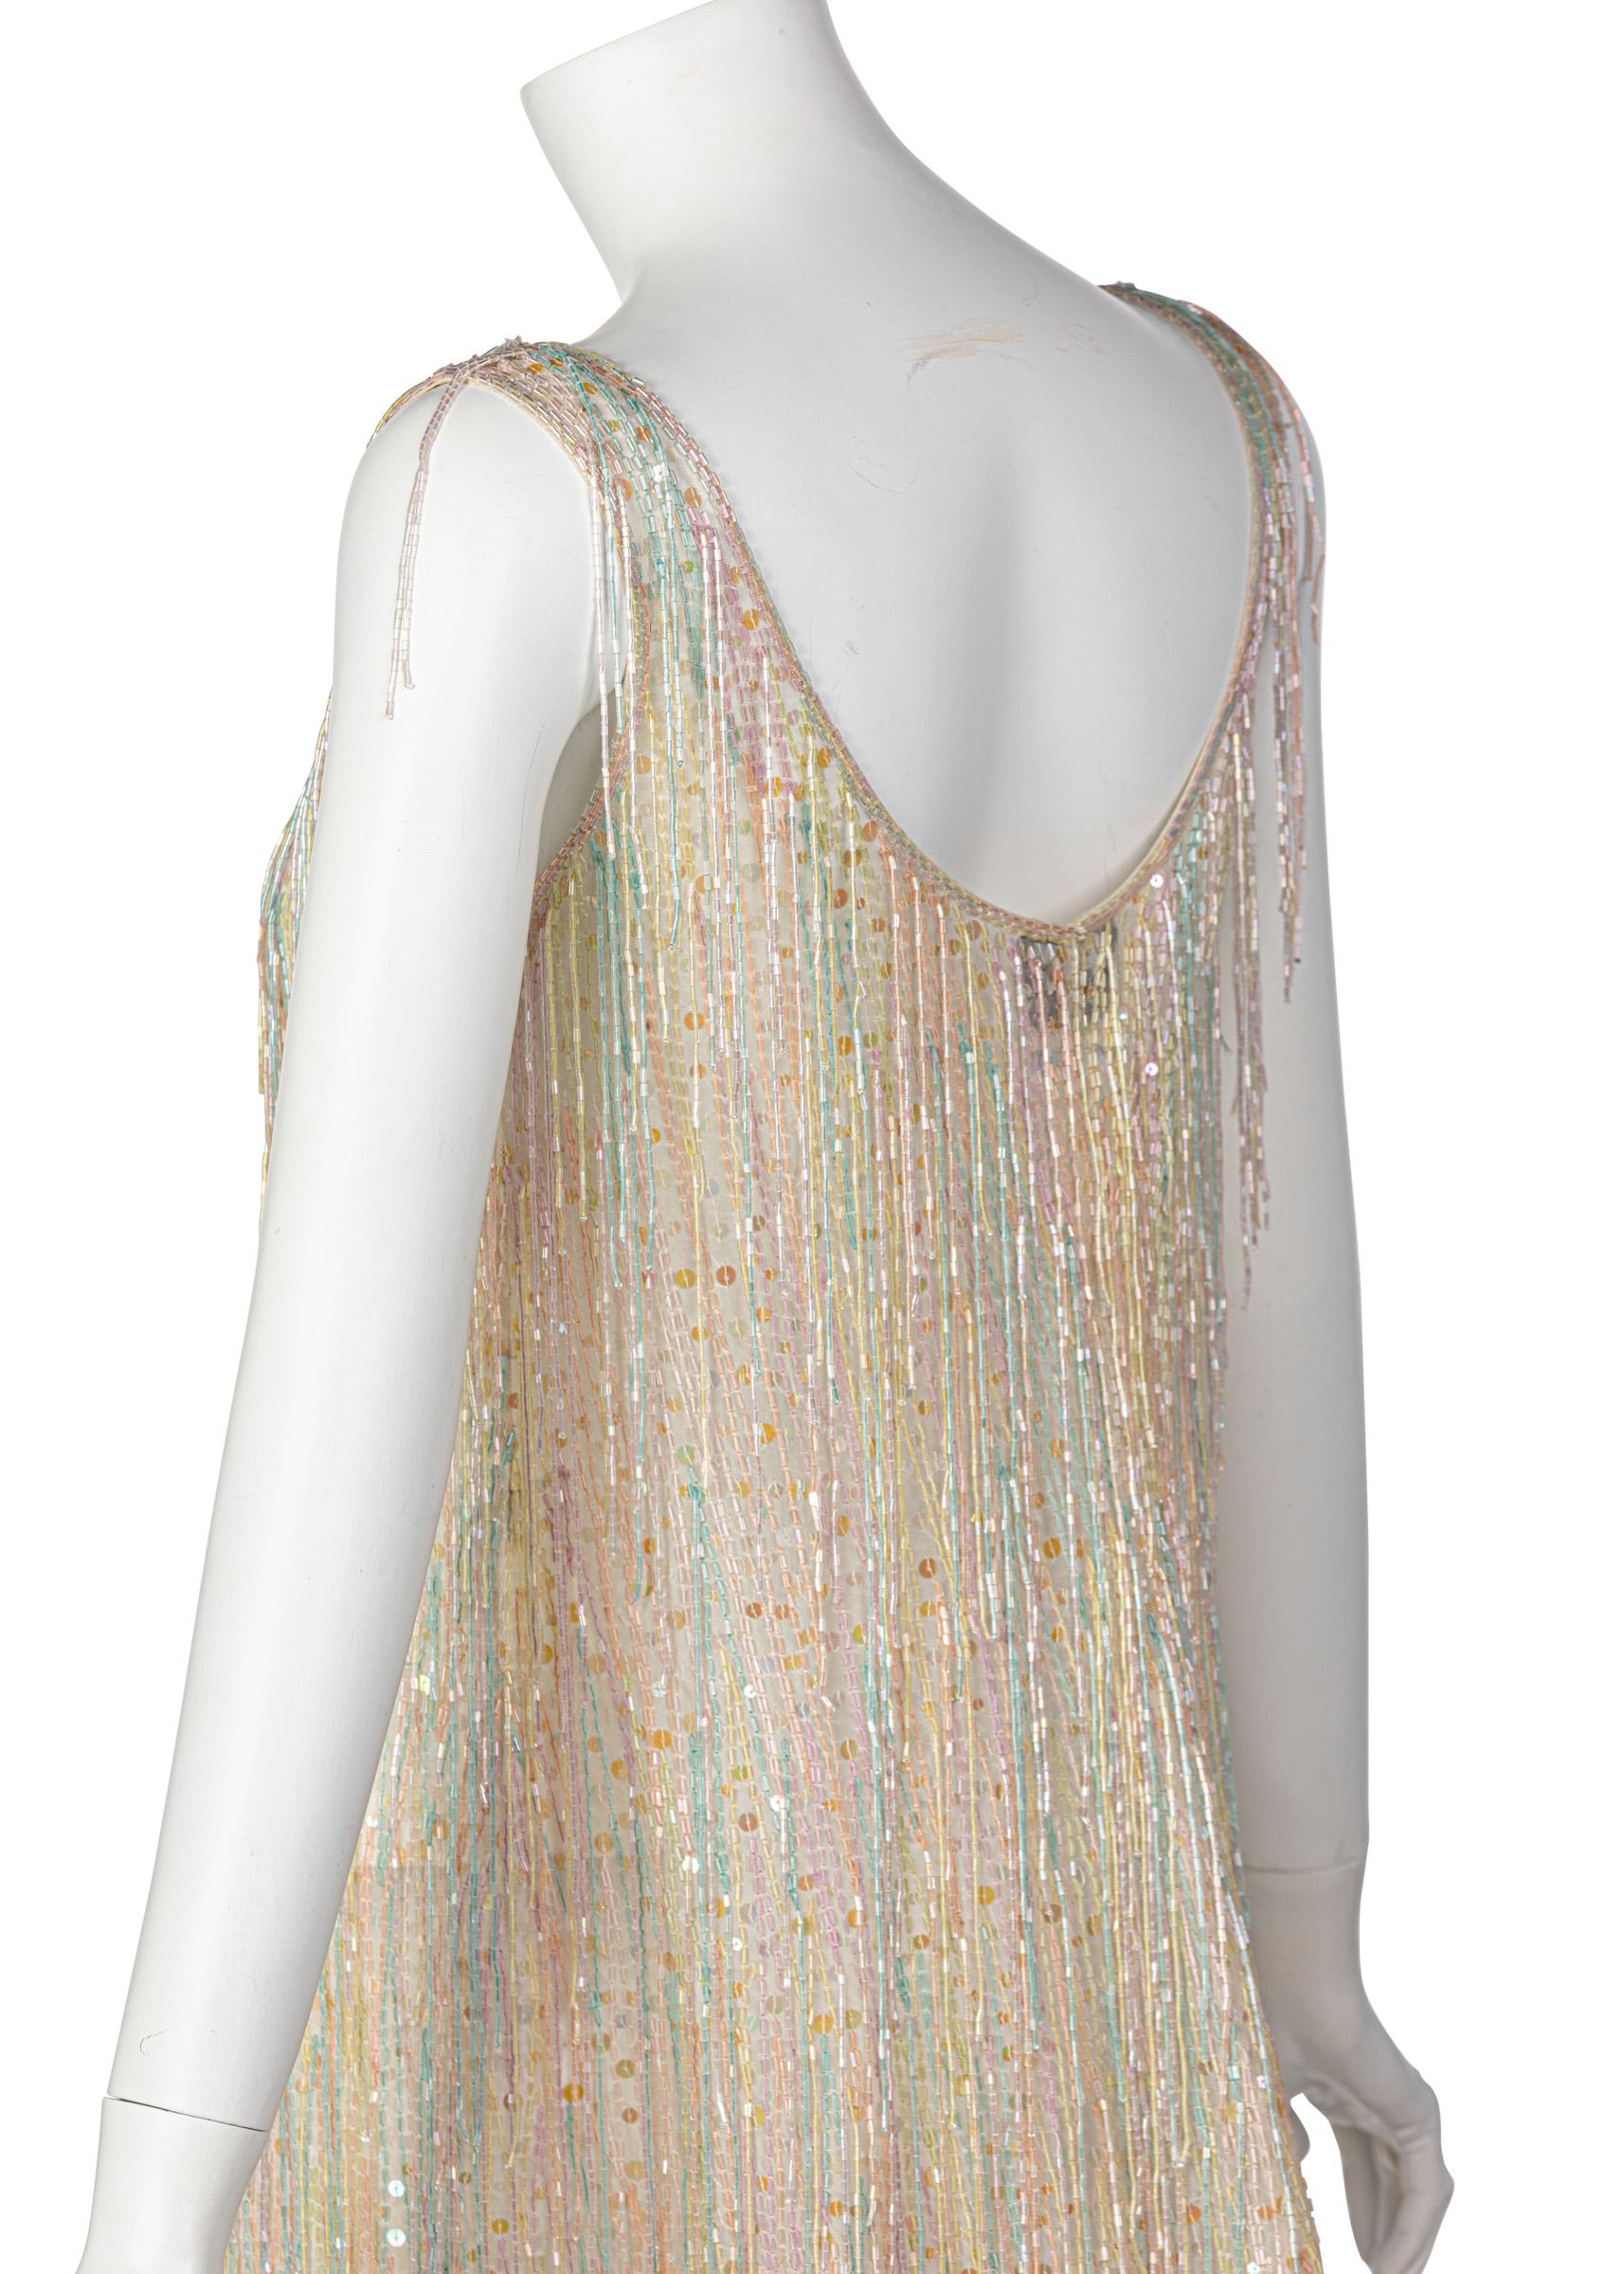 Halston Couture Pastel Rainbow Hand Beaded -Sequin Silk Dress Gown, 1970s 1